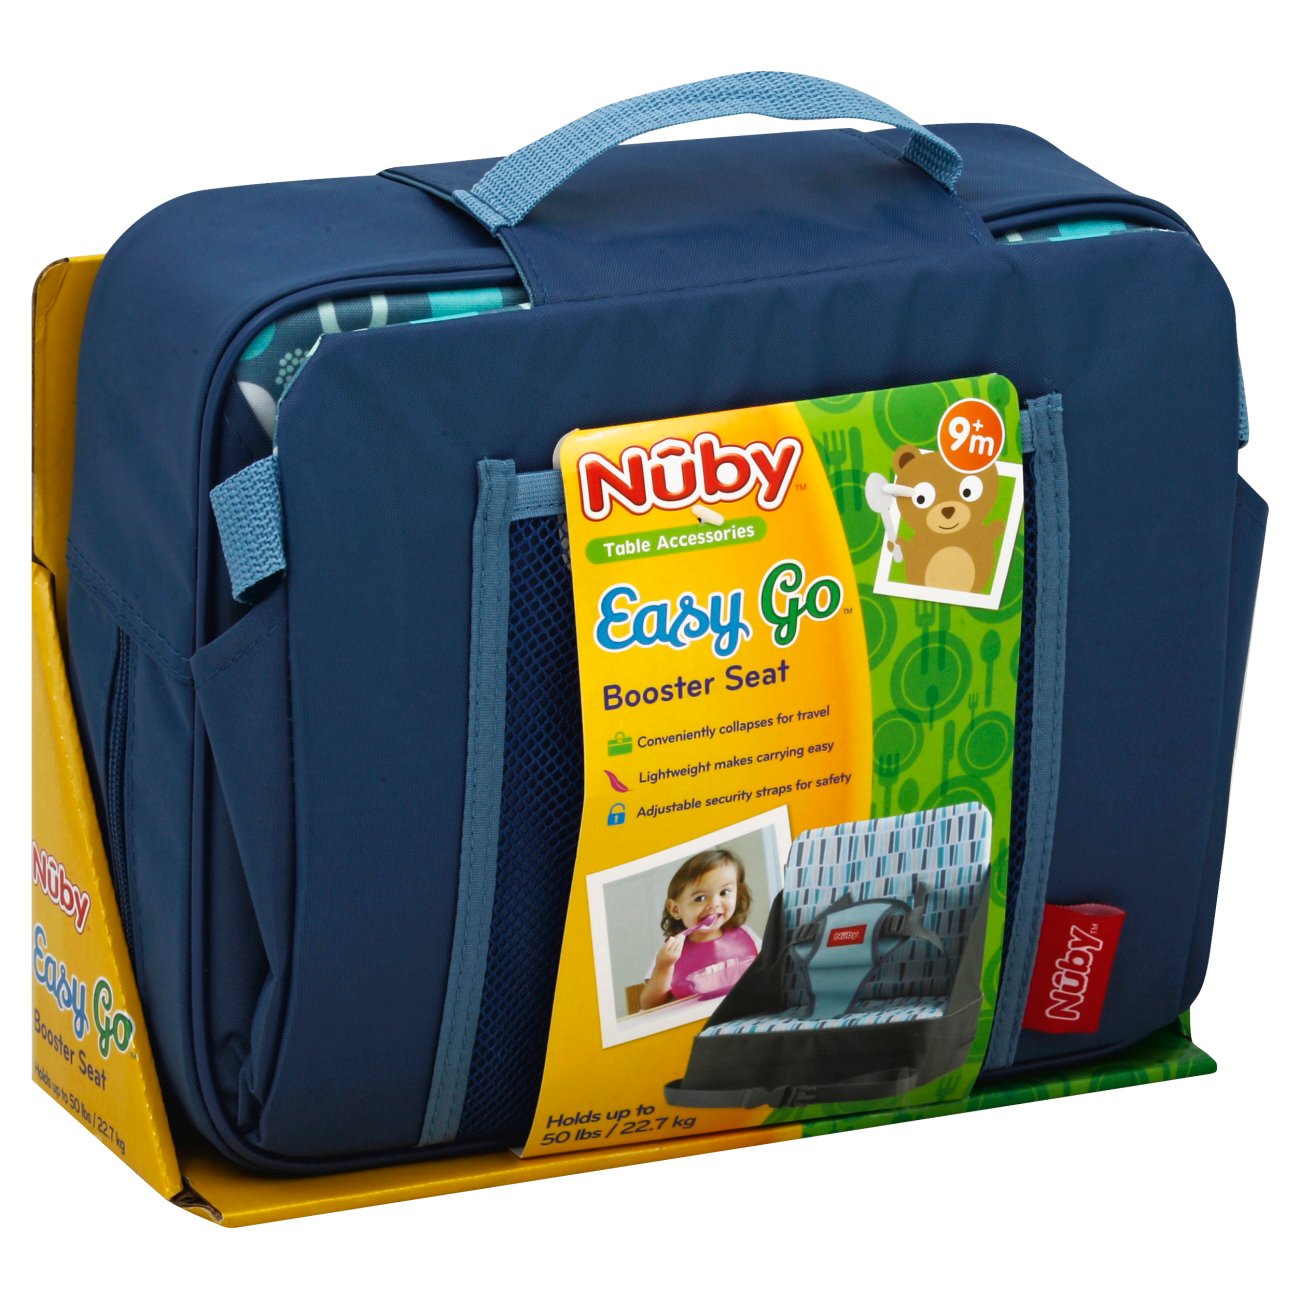 Nuby Easy Go Booster Seat with Adjustable Safety Straps and Harness, Gray,  Unisex